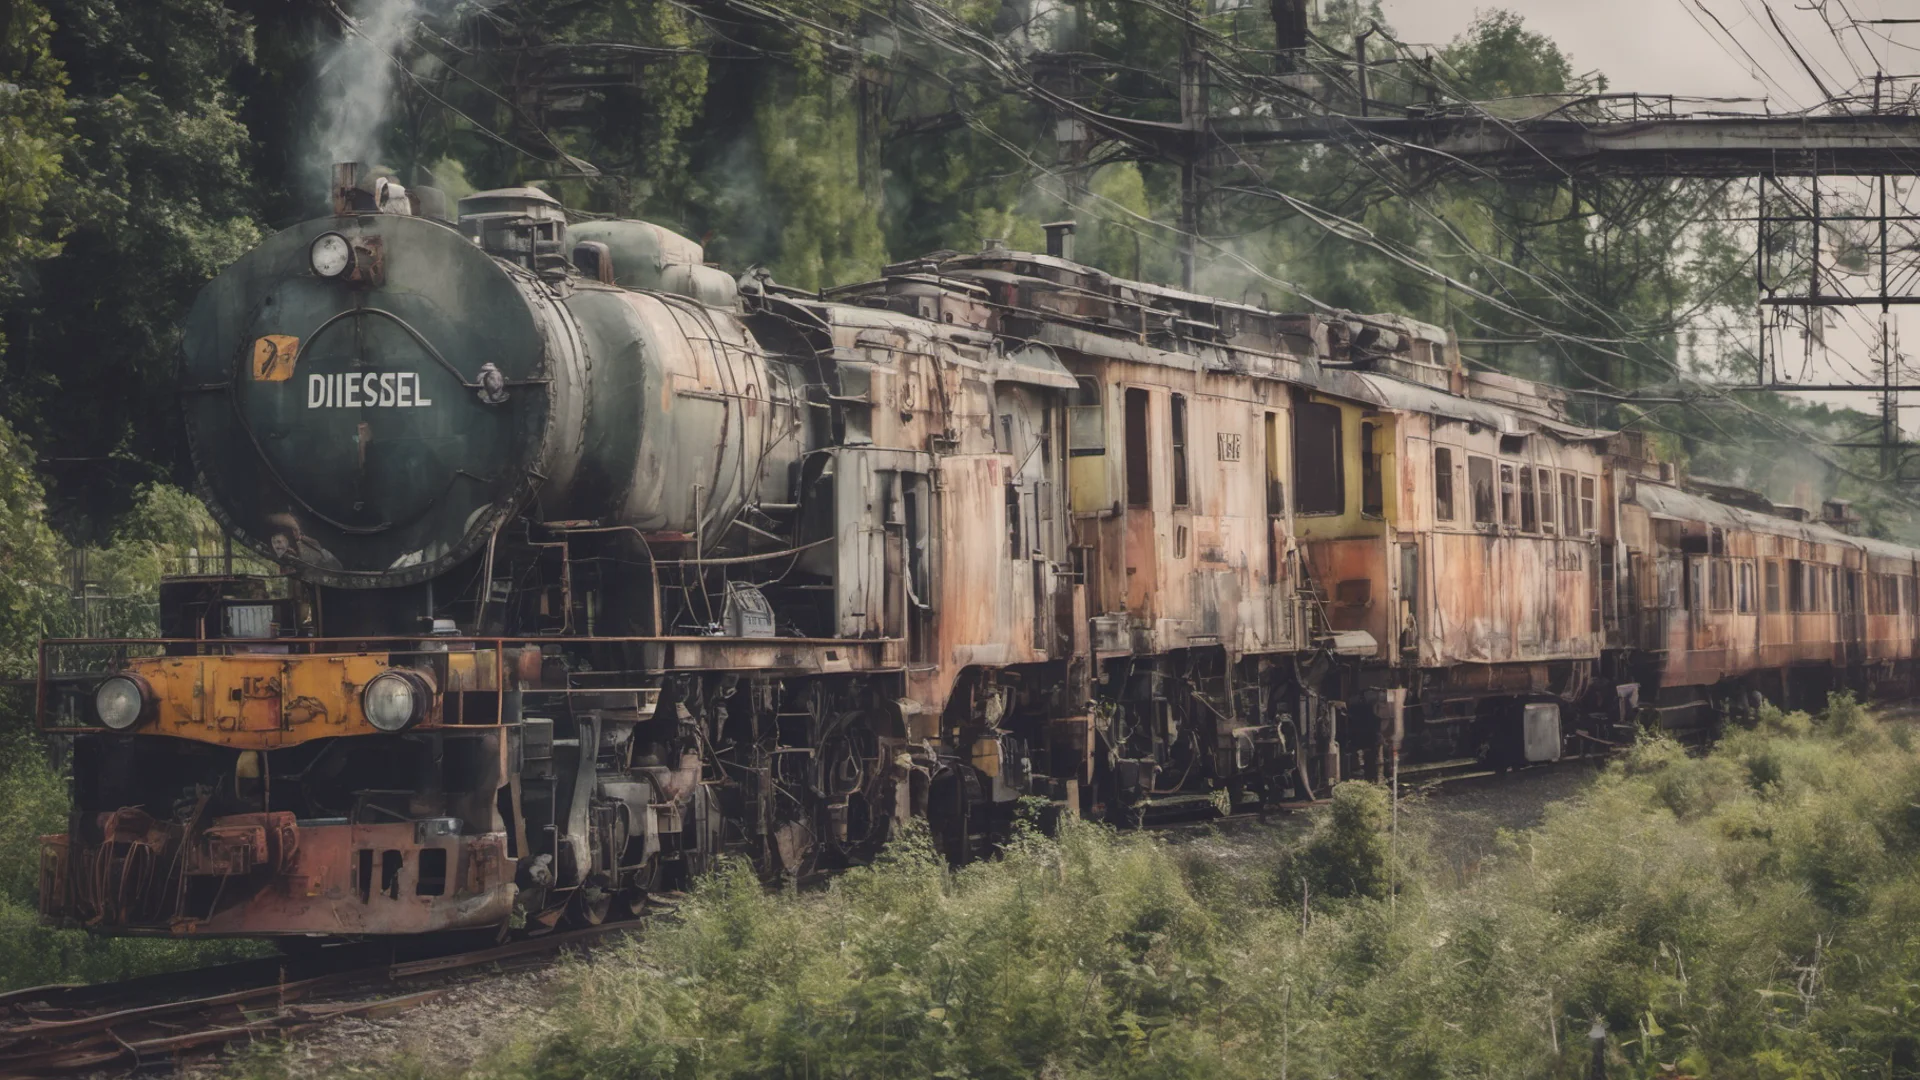 diesel trainarriving at dreamy train station amazing awesome portrait 2 wide